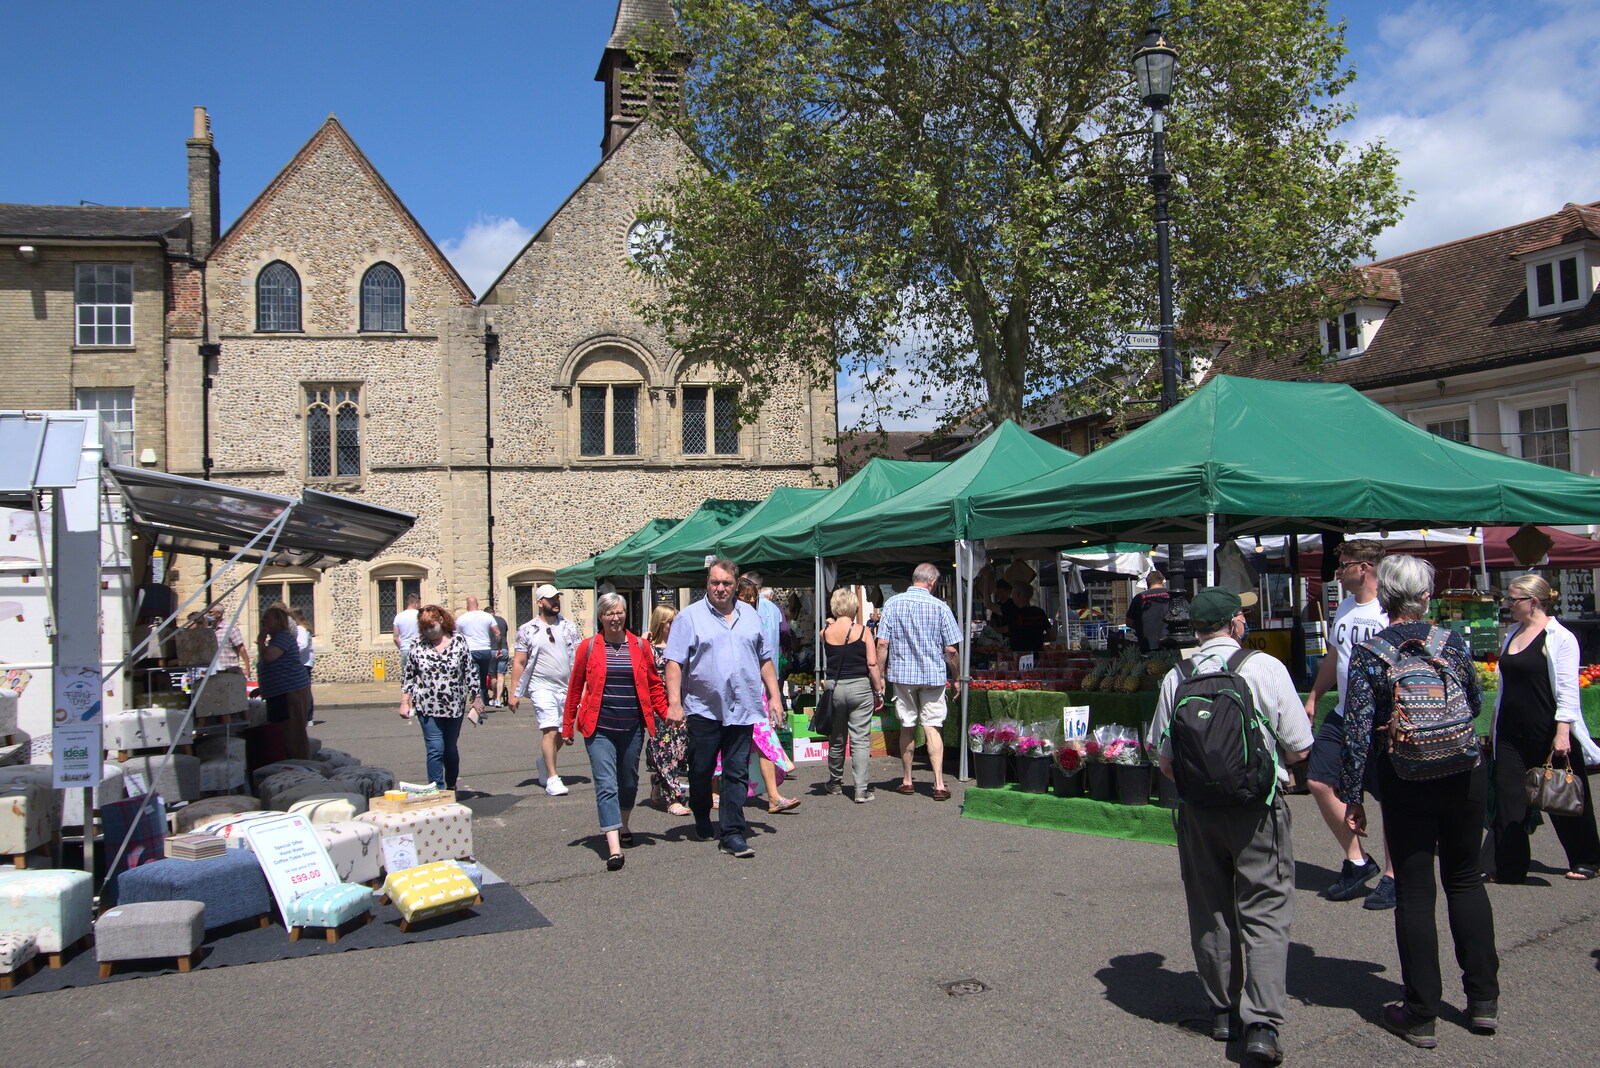 More markets, near Moyse's Hall Museum from A Weekend at the Angel Hotel, Bury St. Edmunds, Suffolk - 5th June 2021